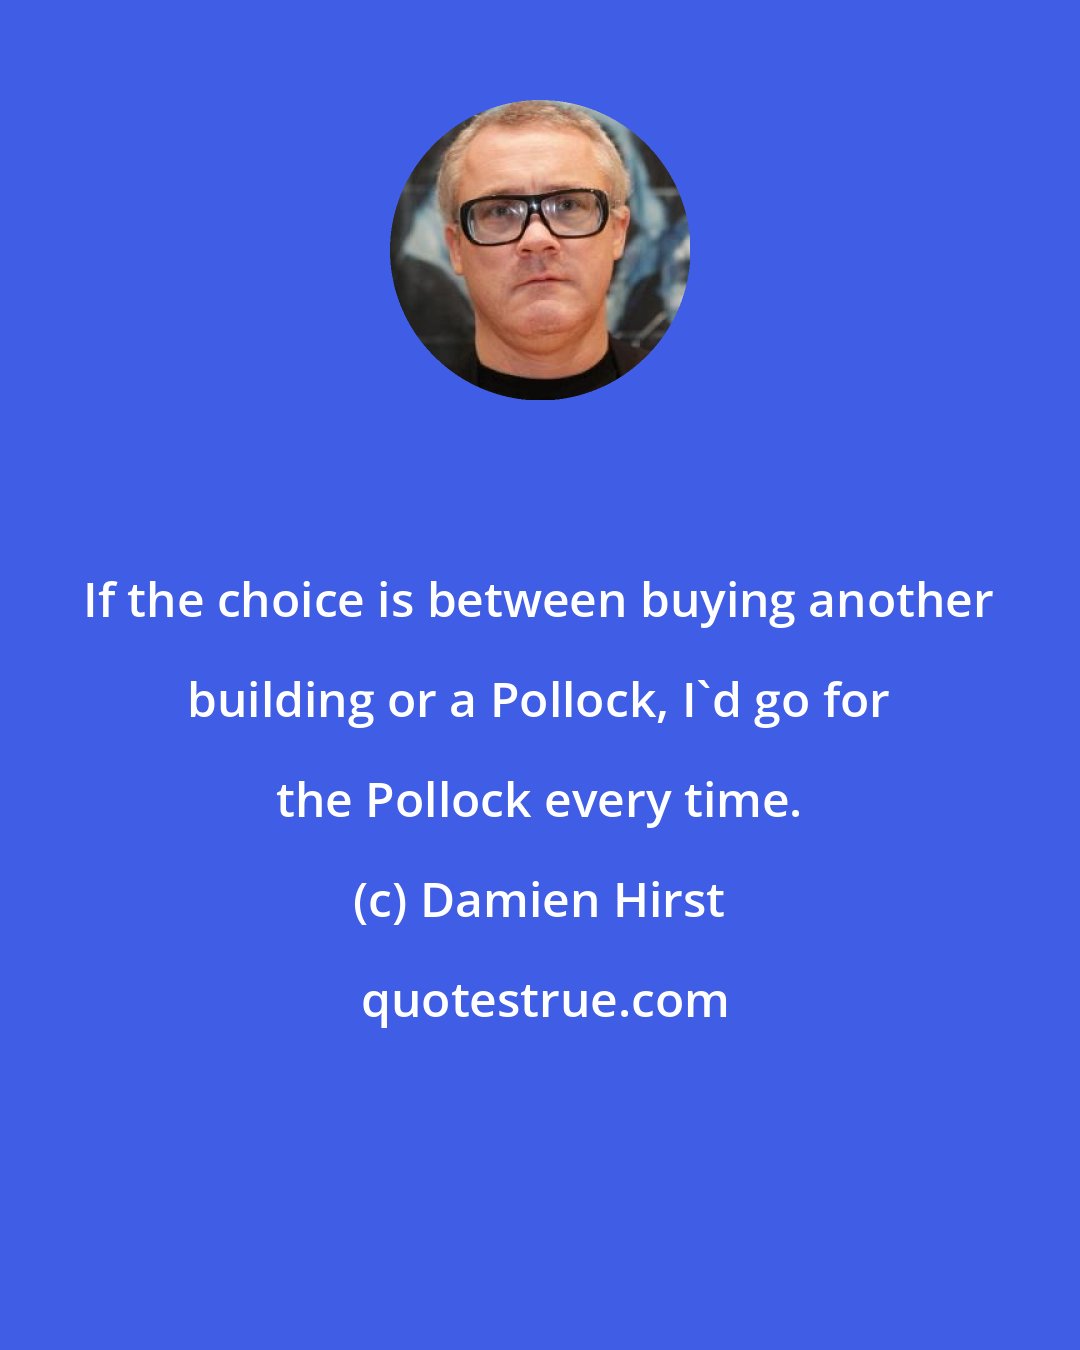 Damien Hirst: If the choice is between buying another building or a Pollock, I'd go for the Pollock every time.